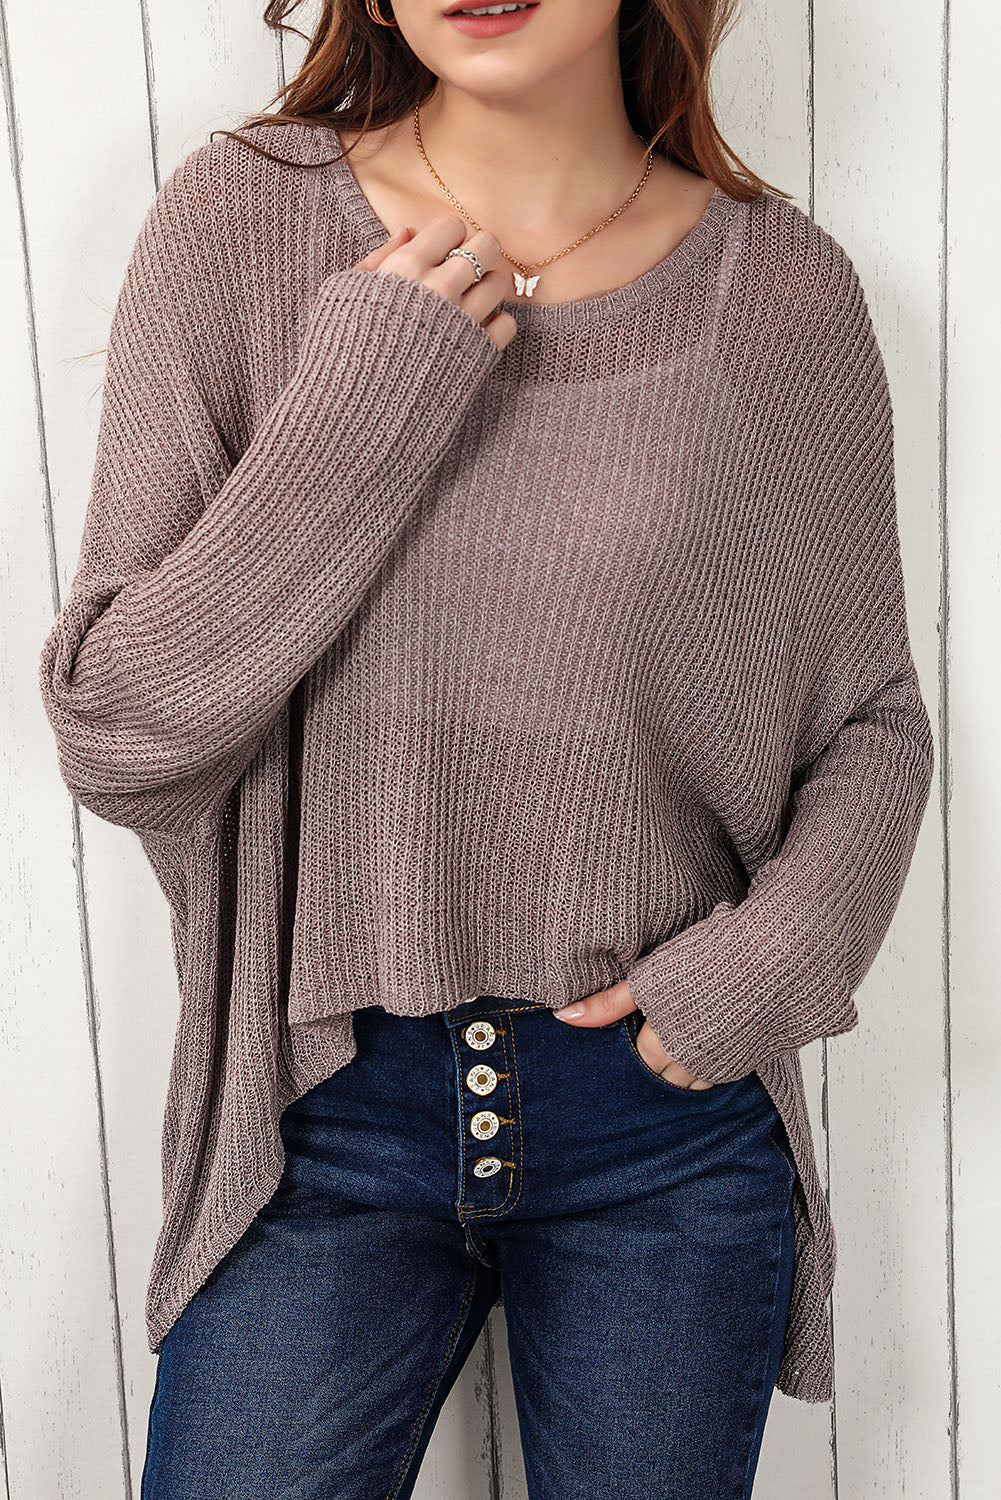 Annabel High-Low Sweater Ships 5-12 business days